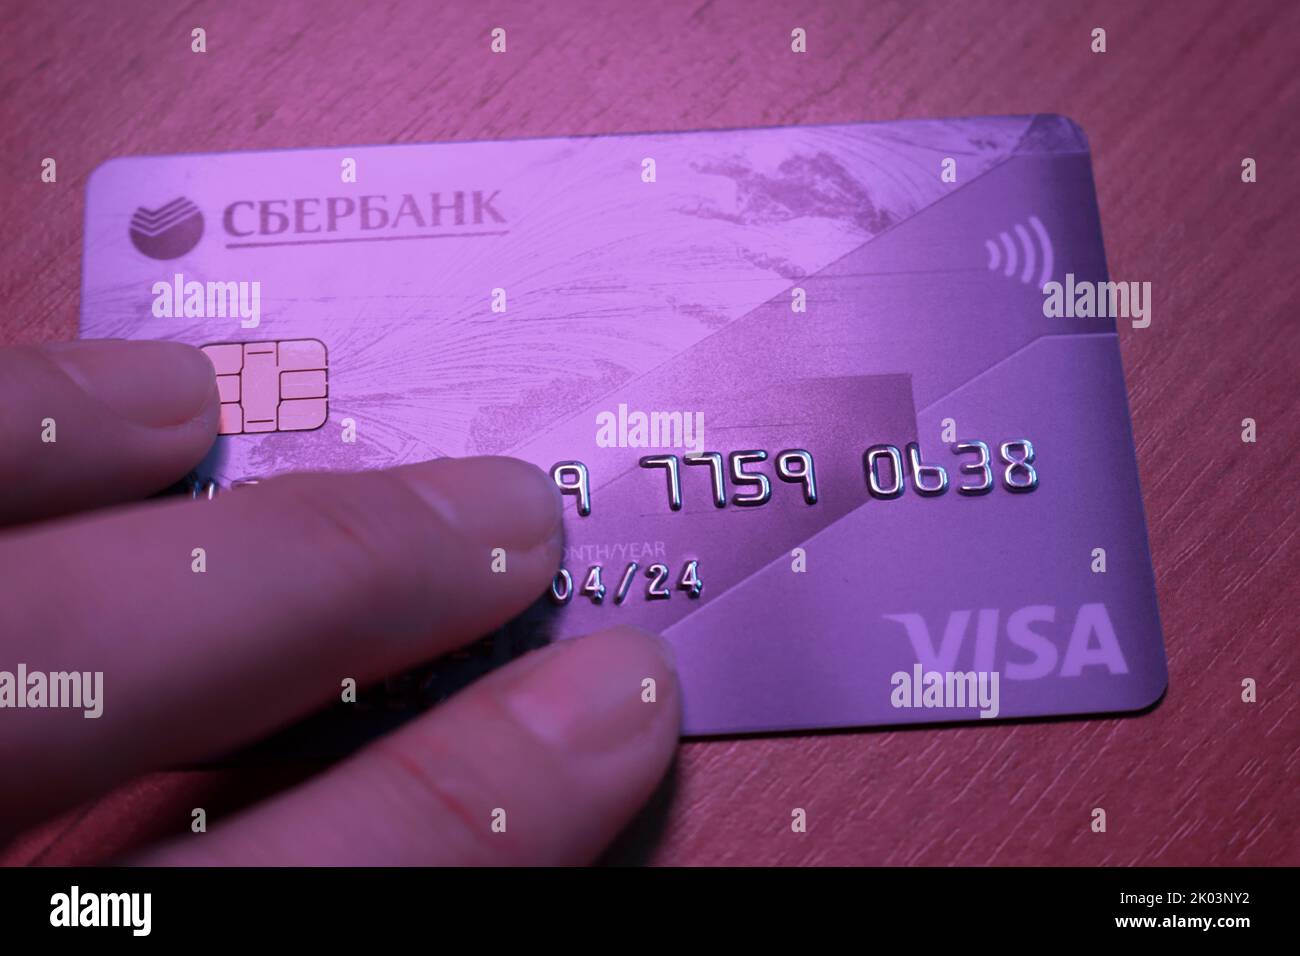 The credit card of Sberbank, which fell under the sanctions, is in hand. Logos Visa, Sberbank close-up. Economic crisis, banking collapse in Russia. M Stock Photo